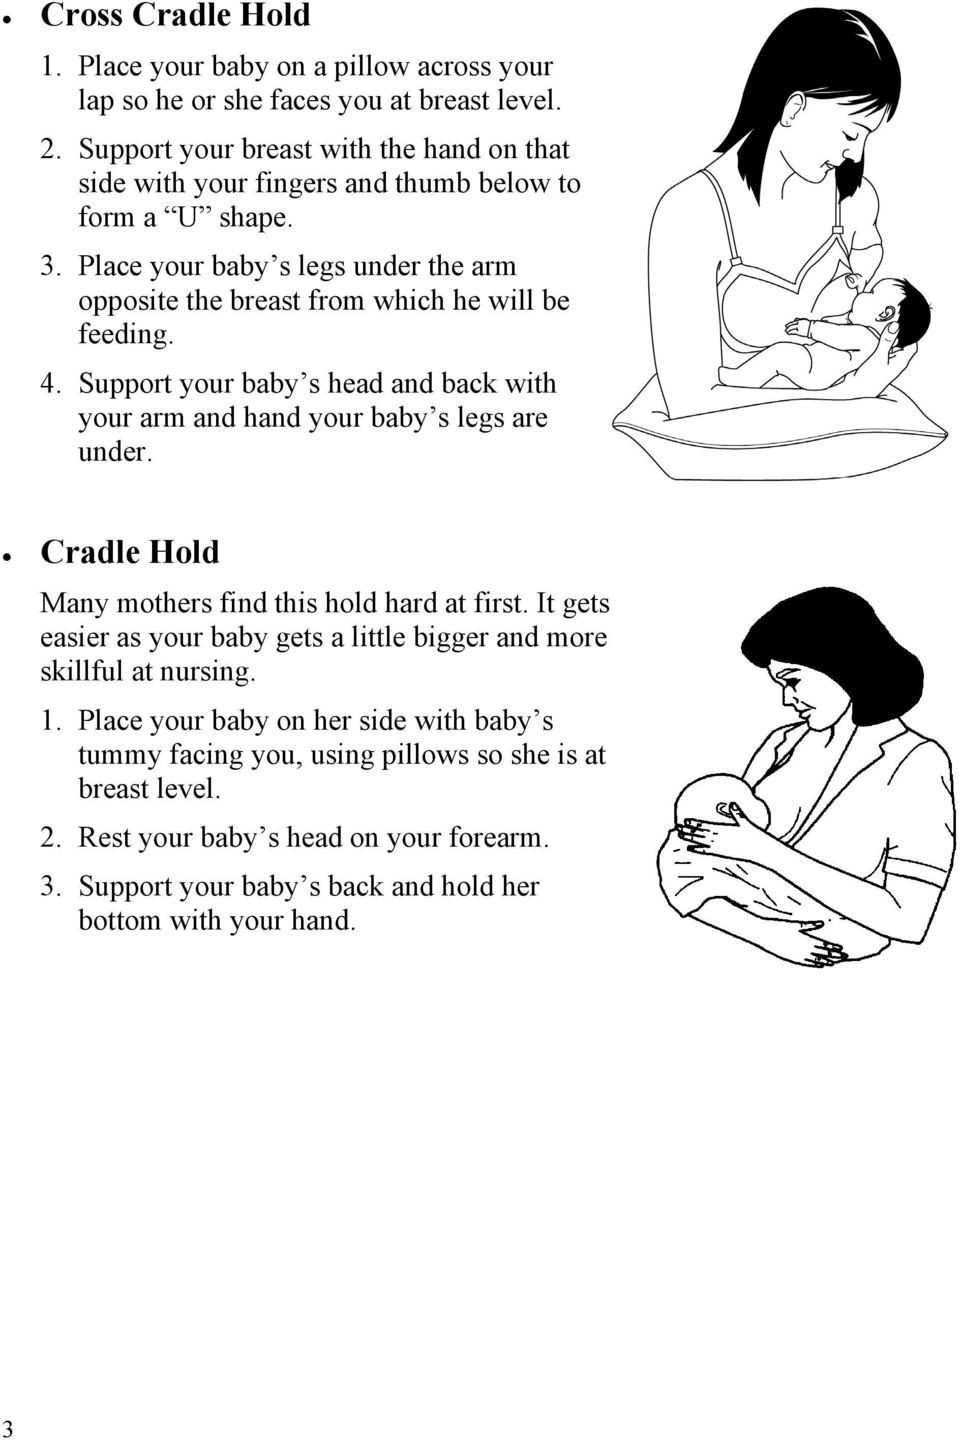 Place your baby s legs under the arm opposite the breast from which he will be feeding. 4. Support your baby s head and back with your arm and hand your baby s legs are under.